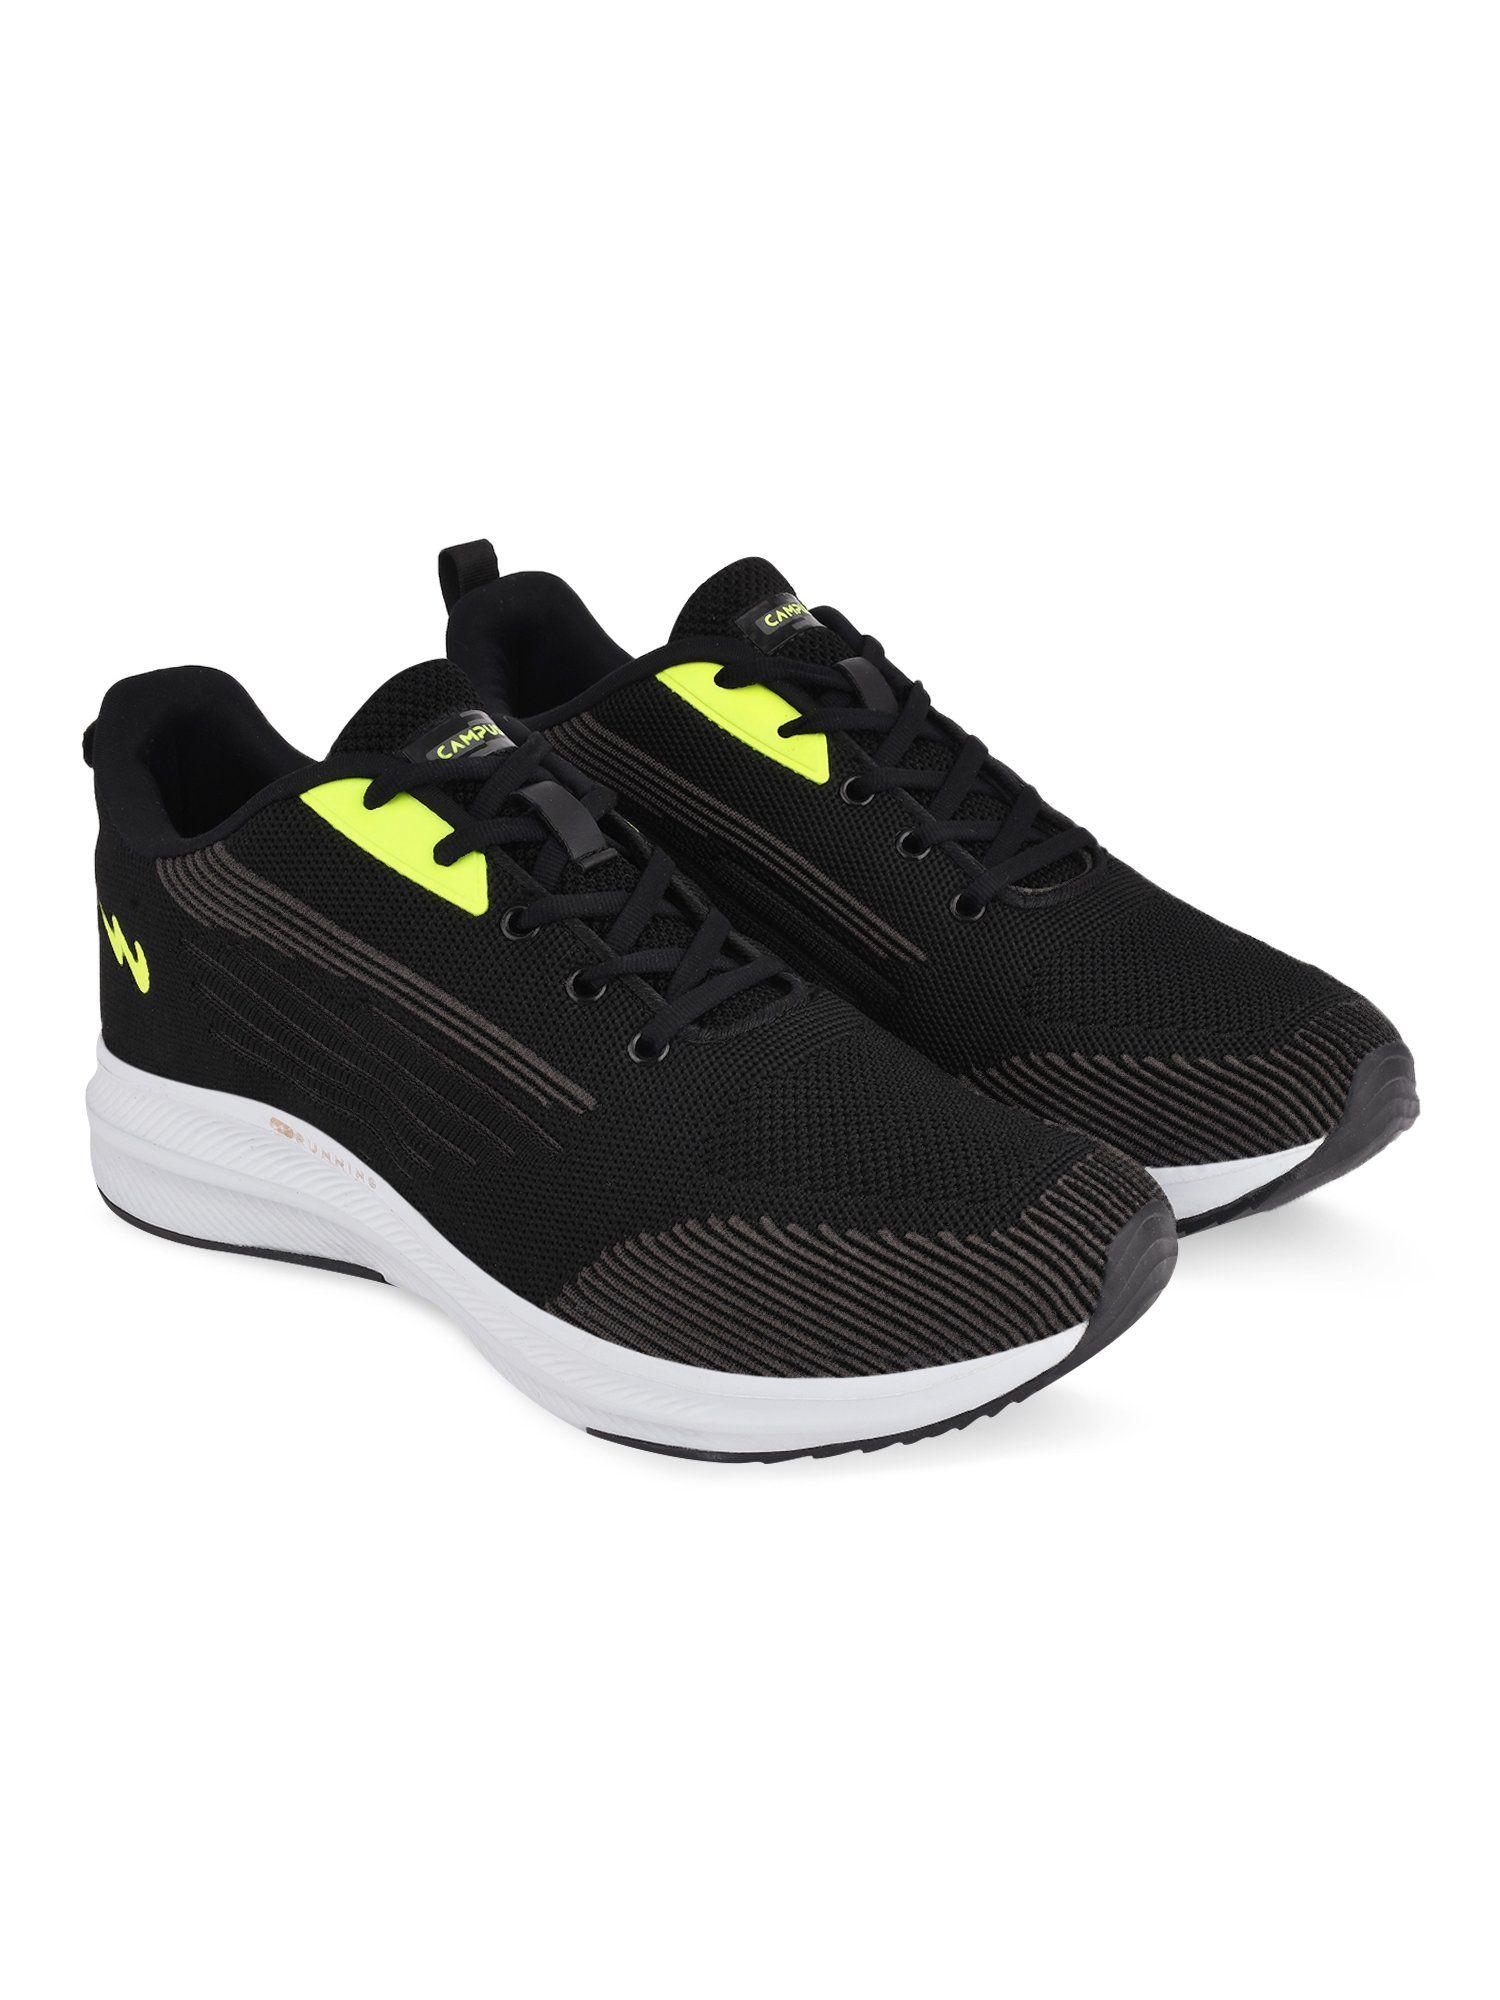 camp-marcus-black-mens-running-shoes